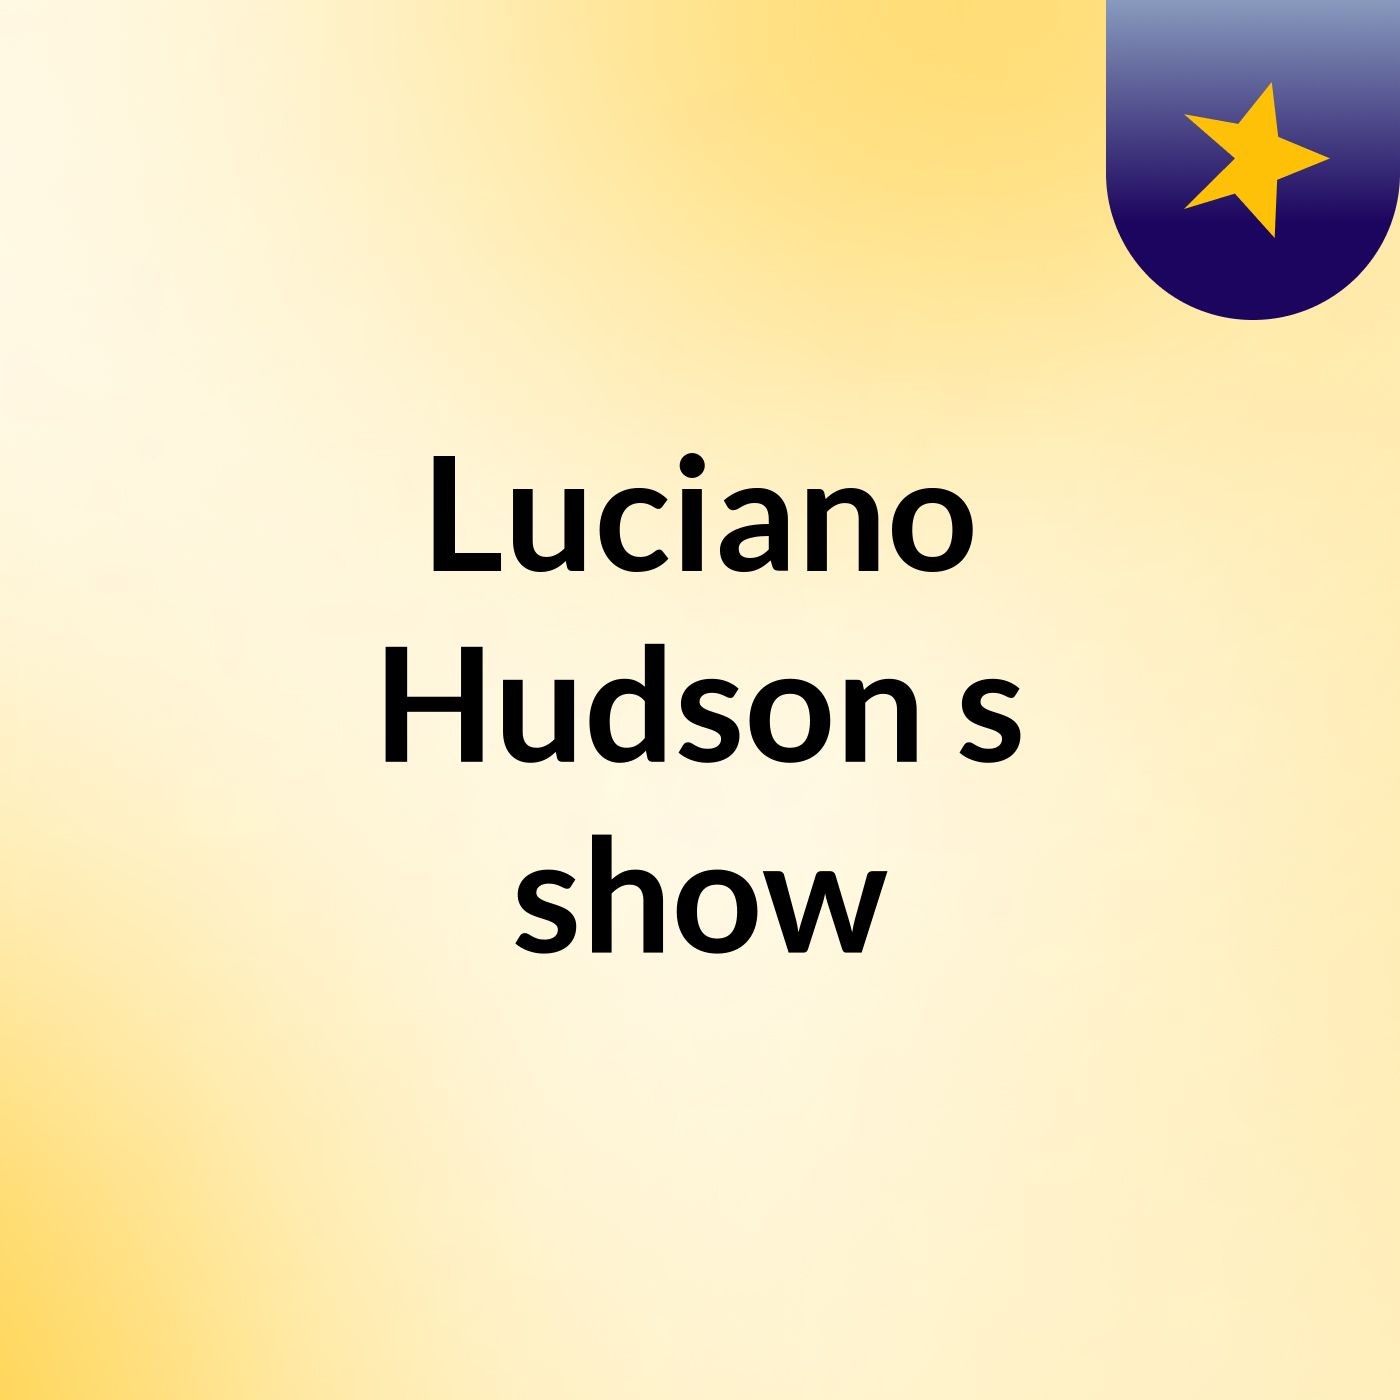 Luciano Hudson's show